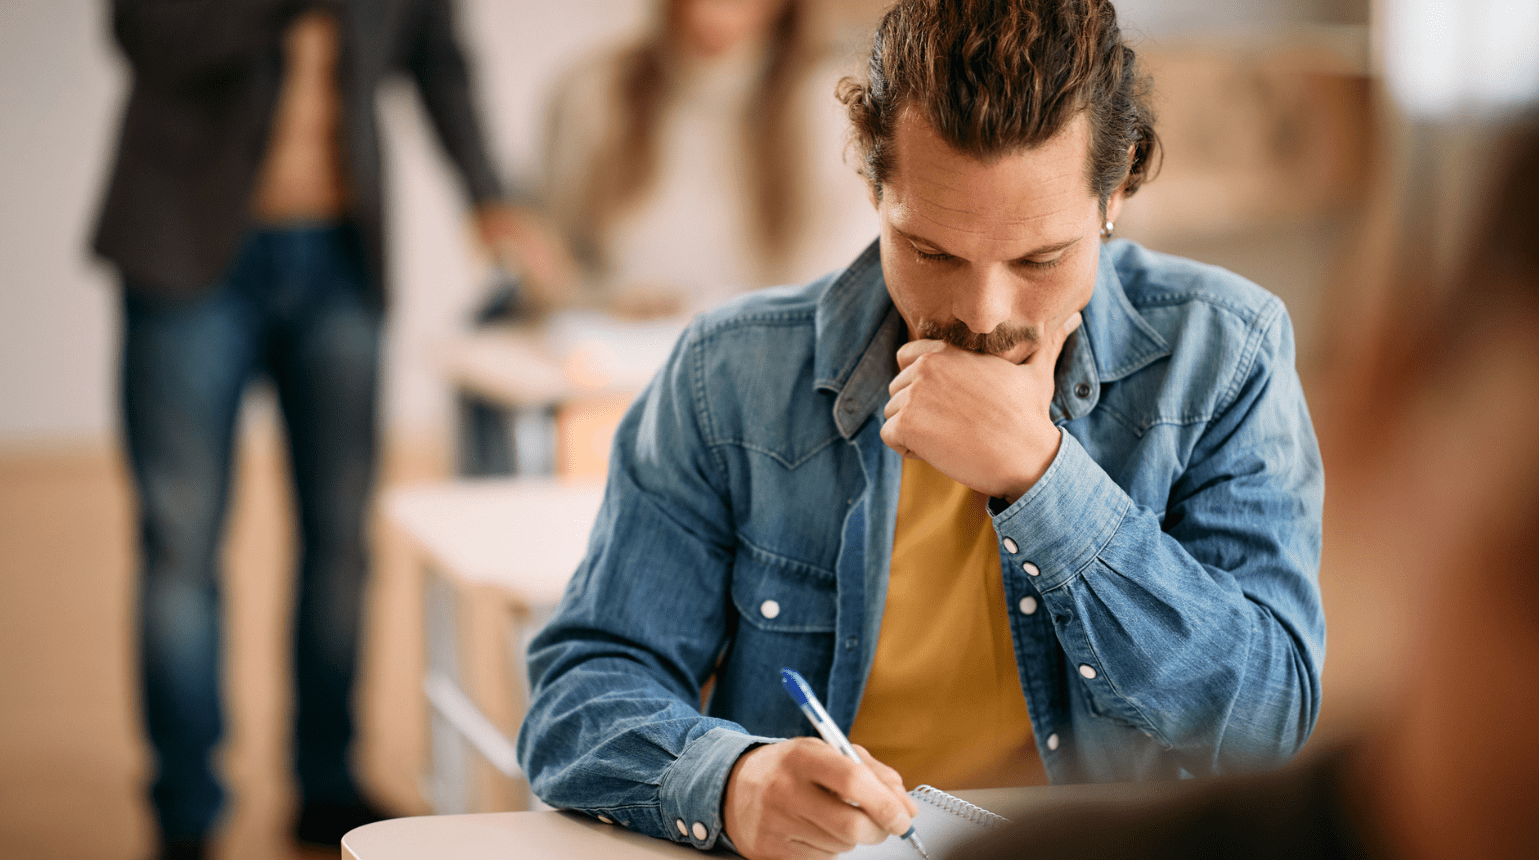 Man sitting in a classroom writing on paper